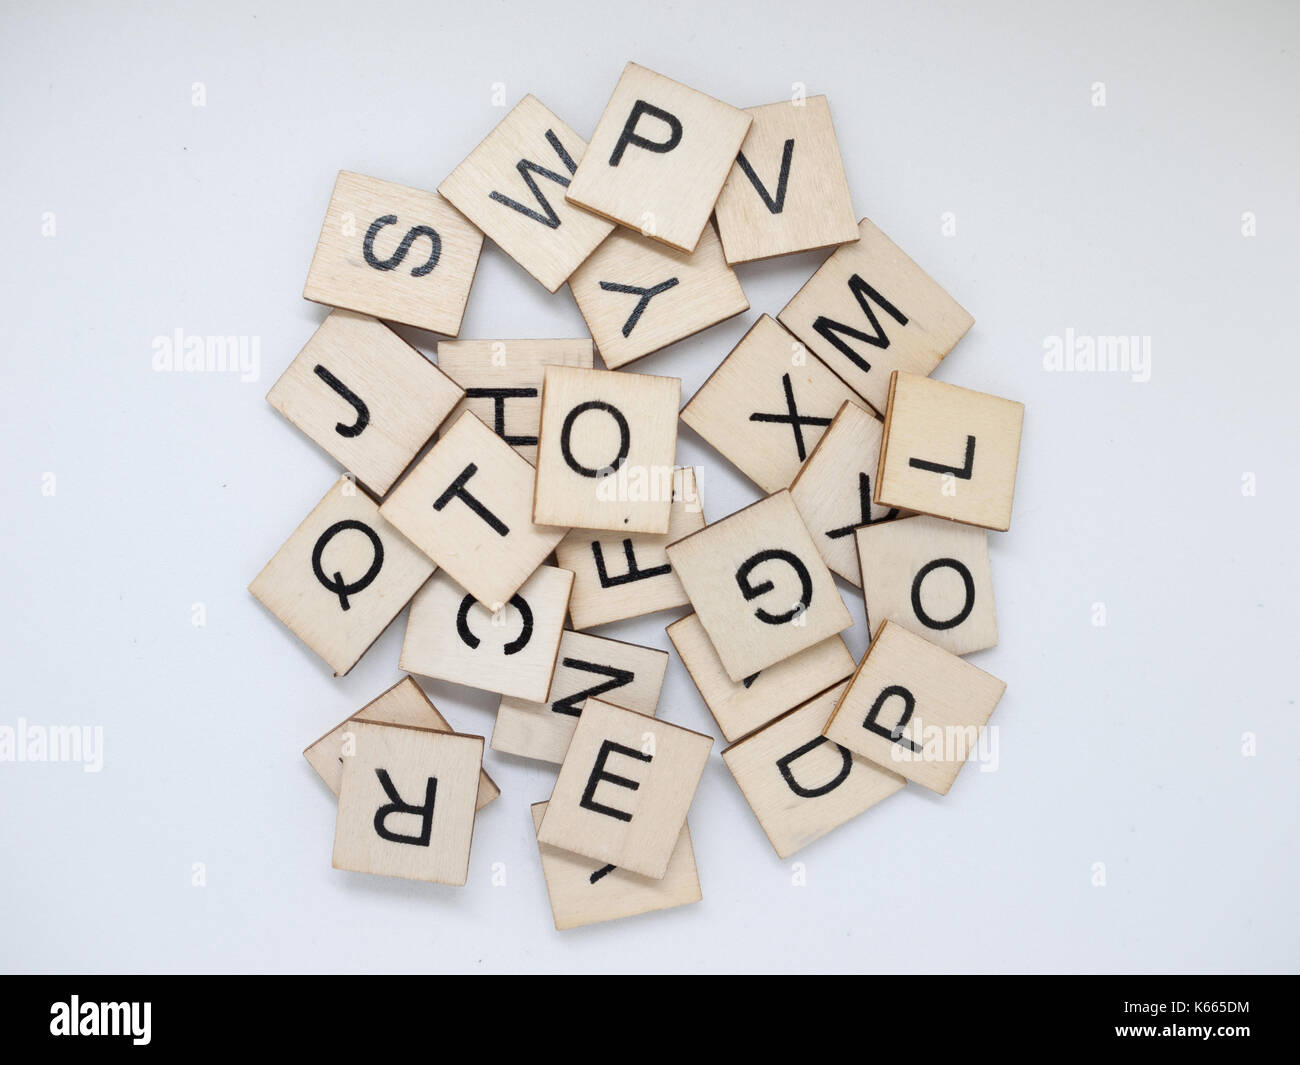 A messy pile of wooden letter tiles. Stock Photo